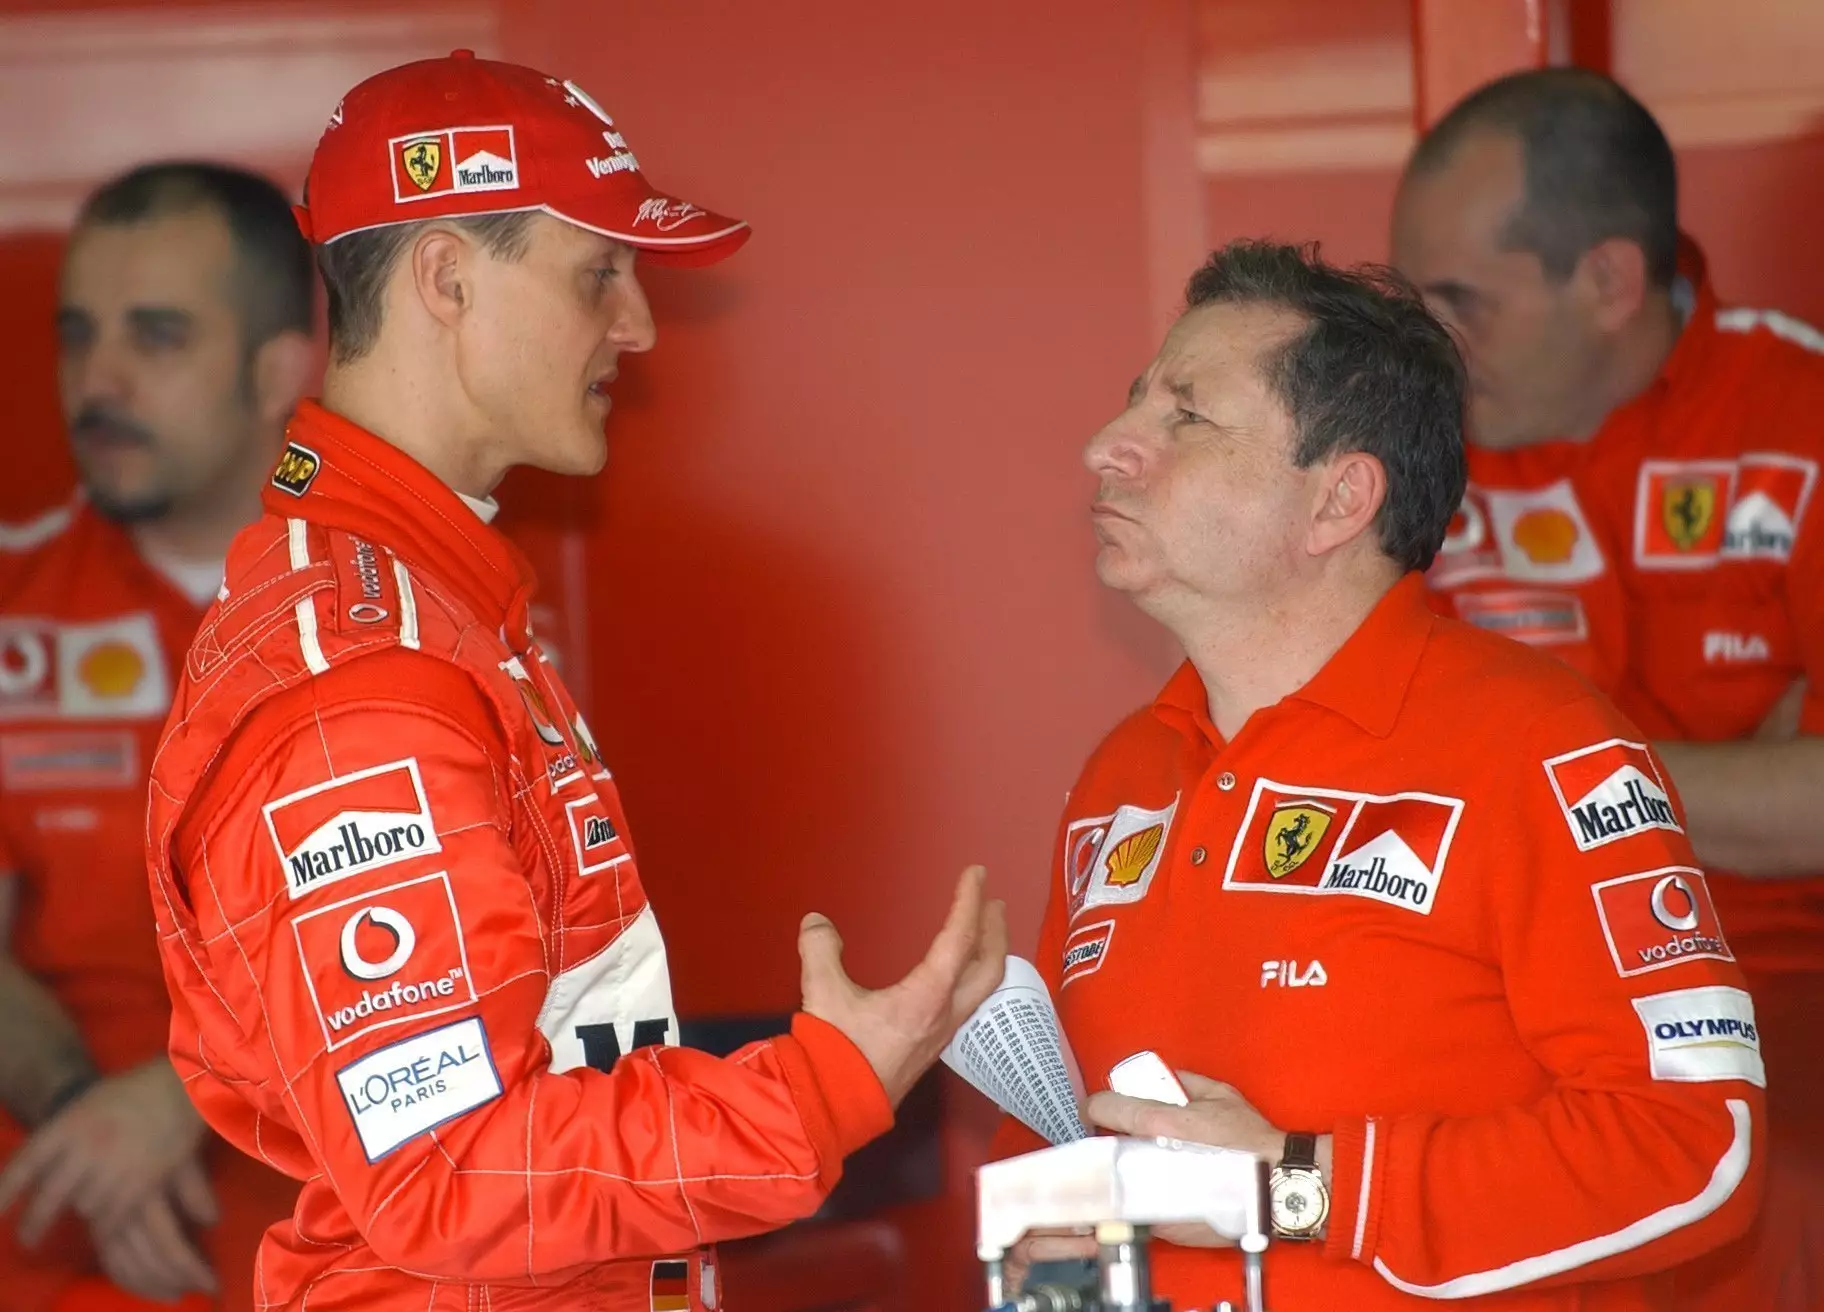 Schumacher has not been seen in public since a ski accident in 2013.